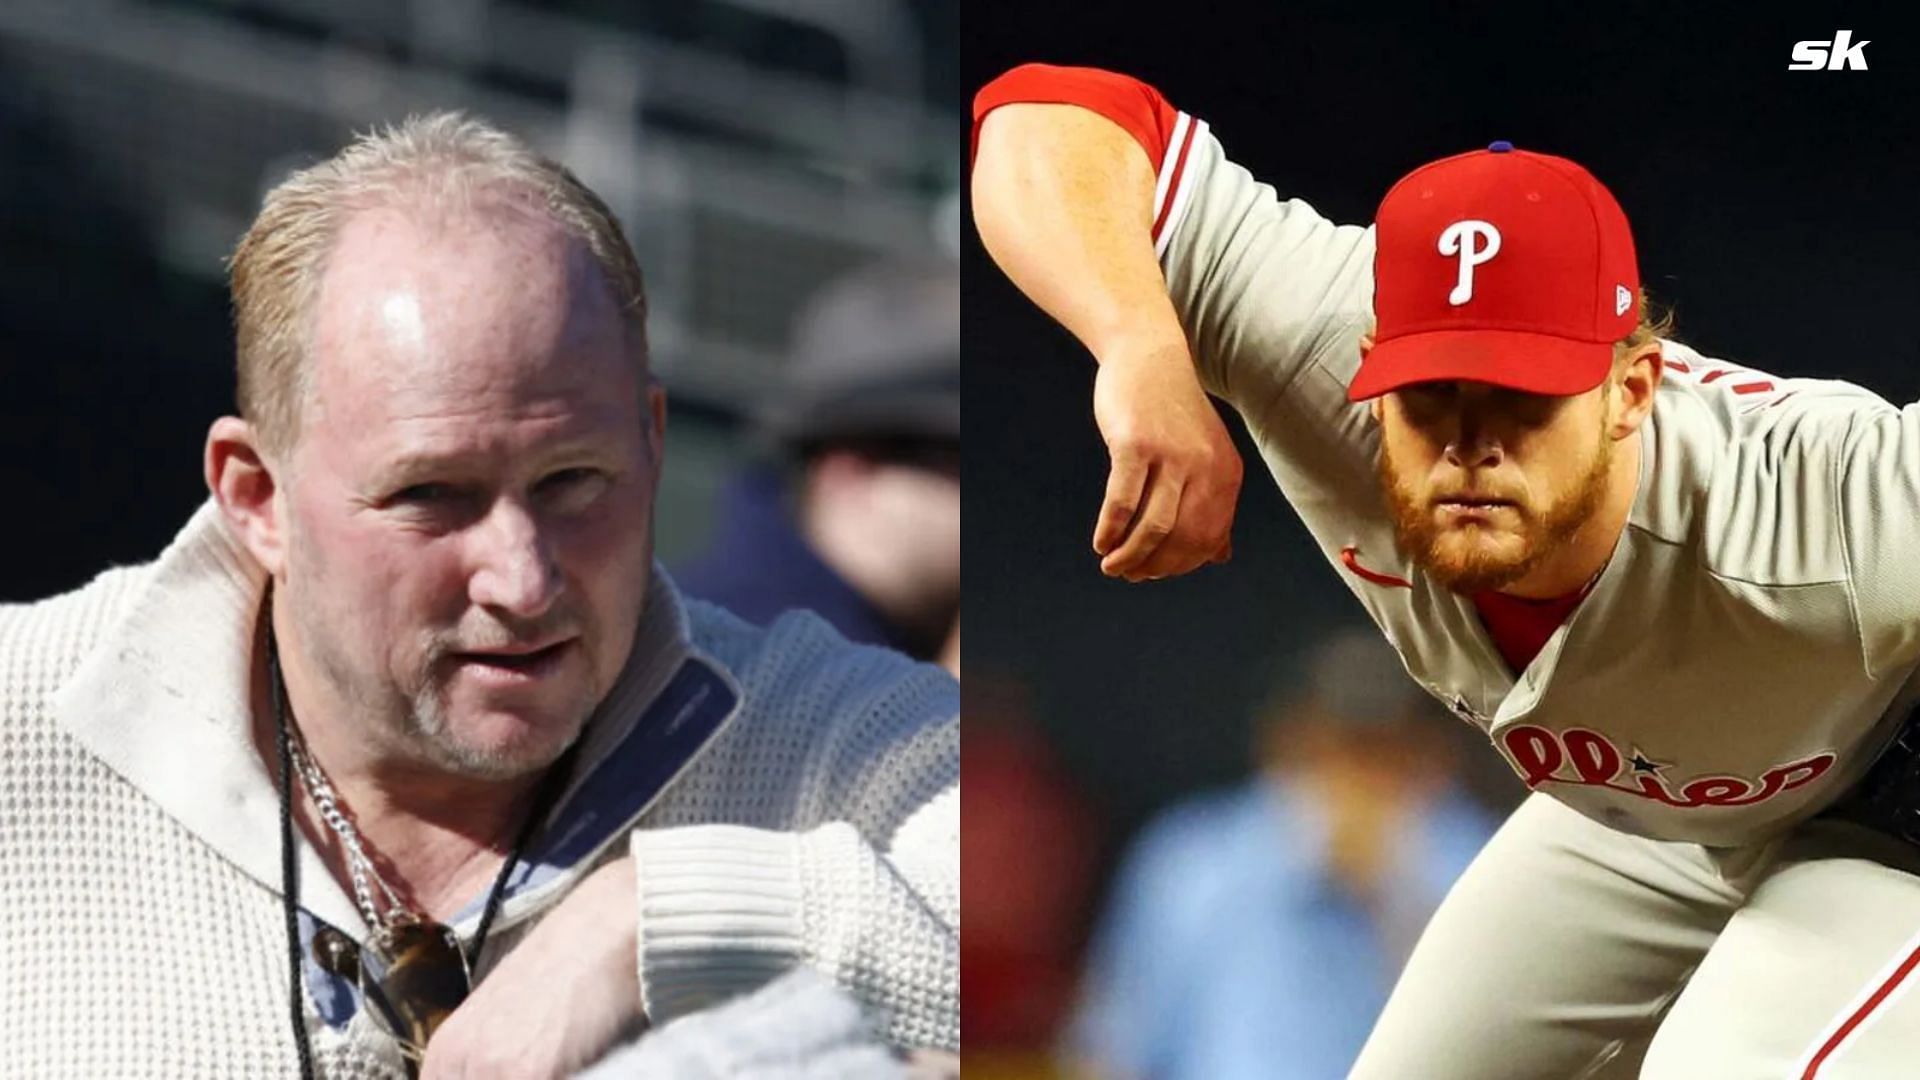 MLB Insider feels Craig Kimbrel not going to make it to Cooperstown